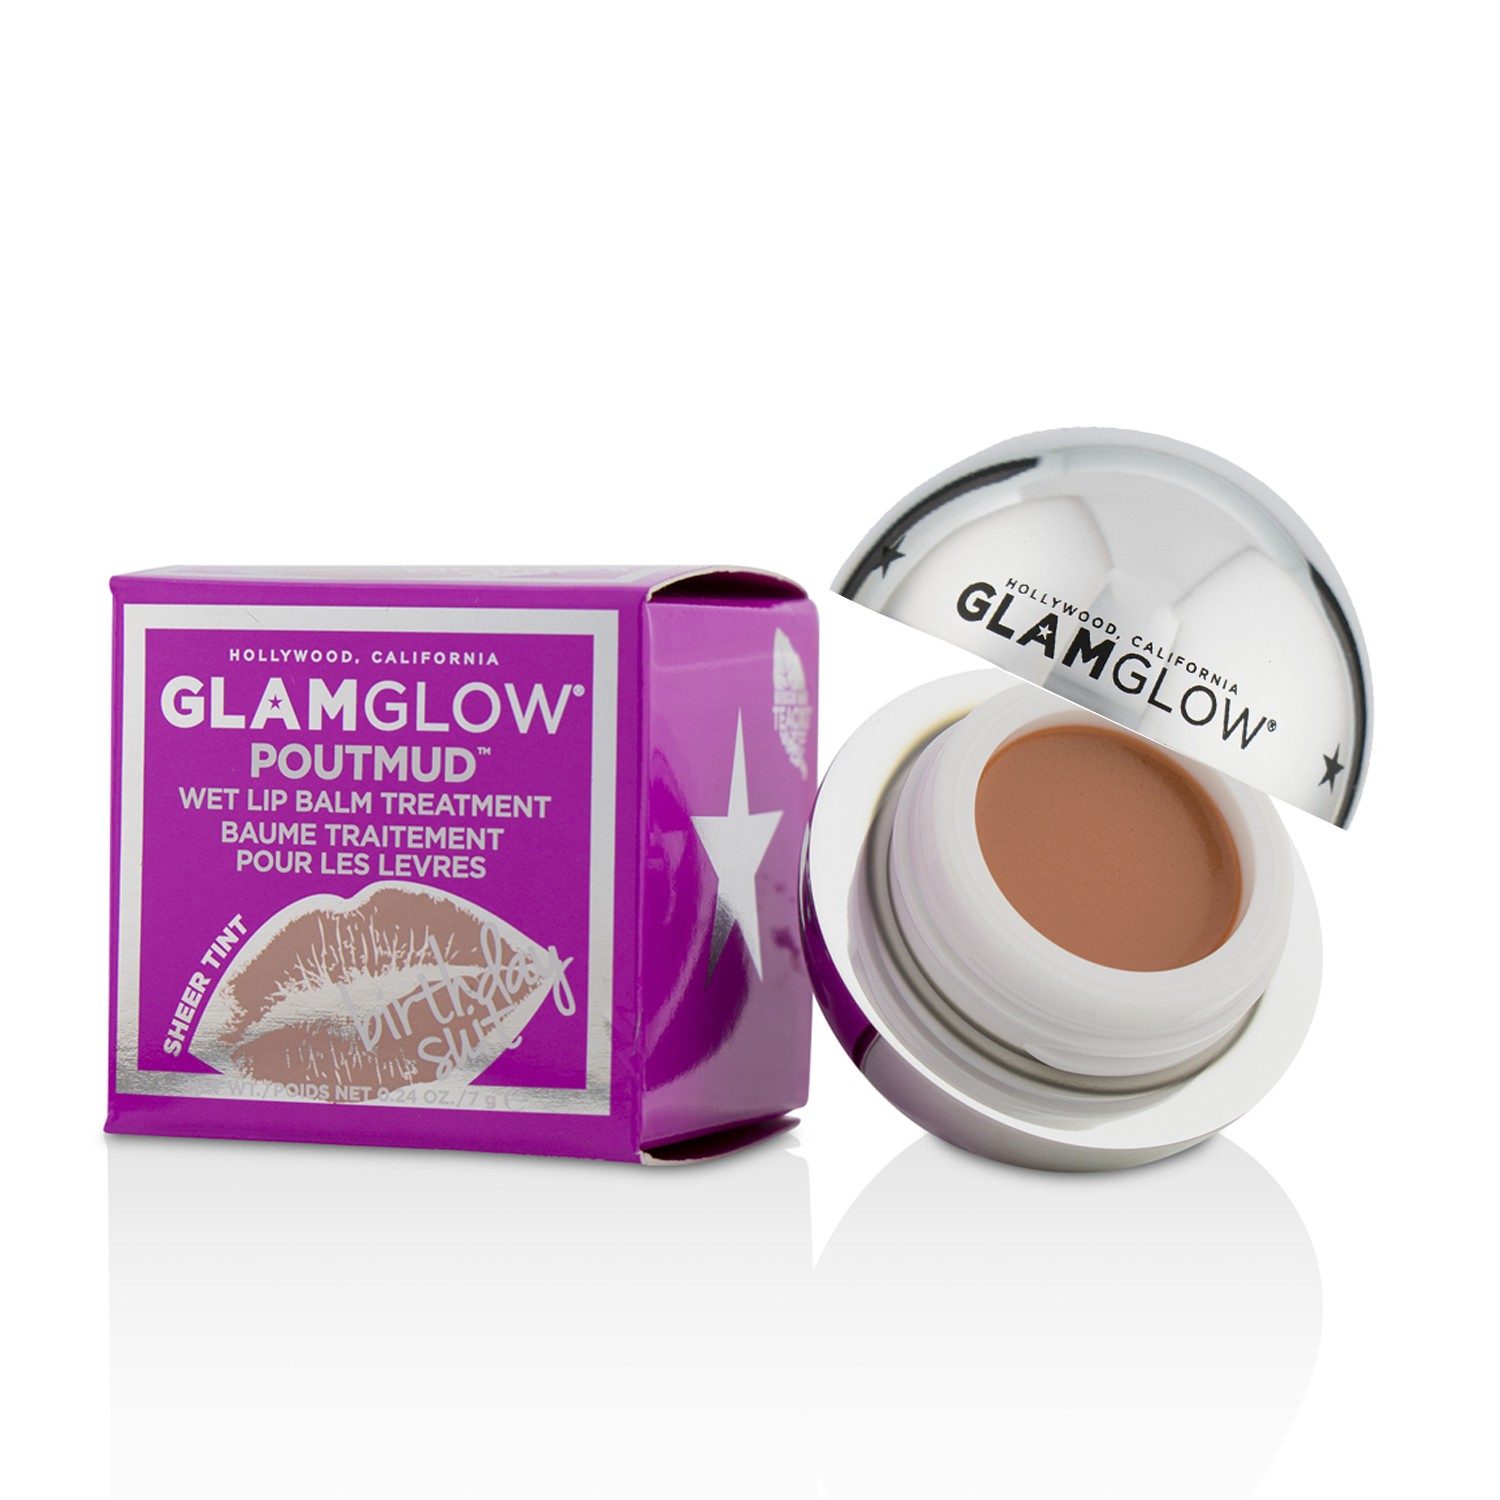 PoutMud Sheer Tint Wet Lip Balm Treatment - Birthday Suit Glamglow Image